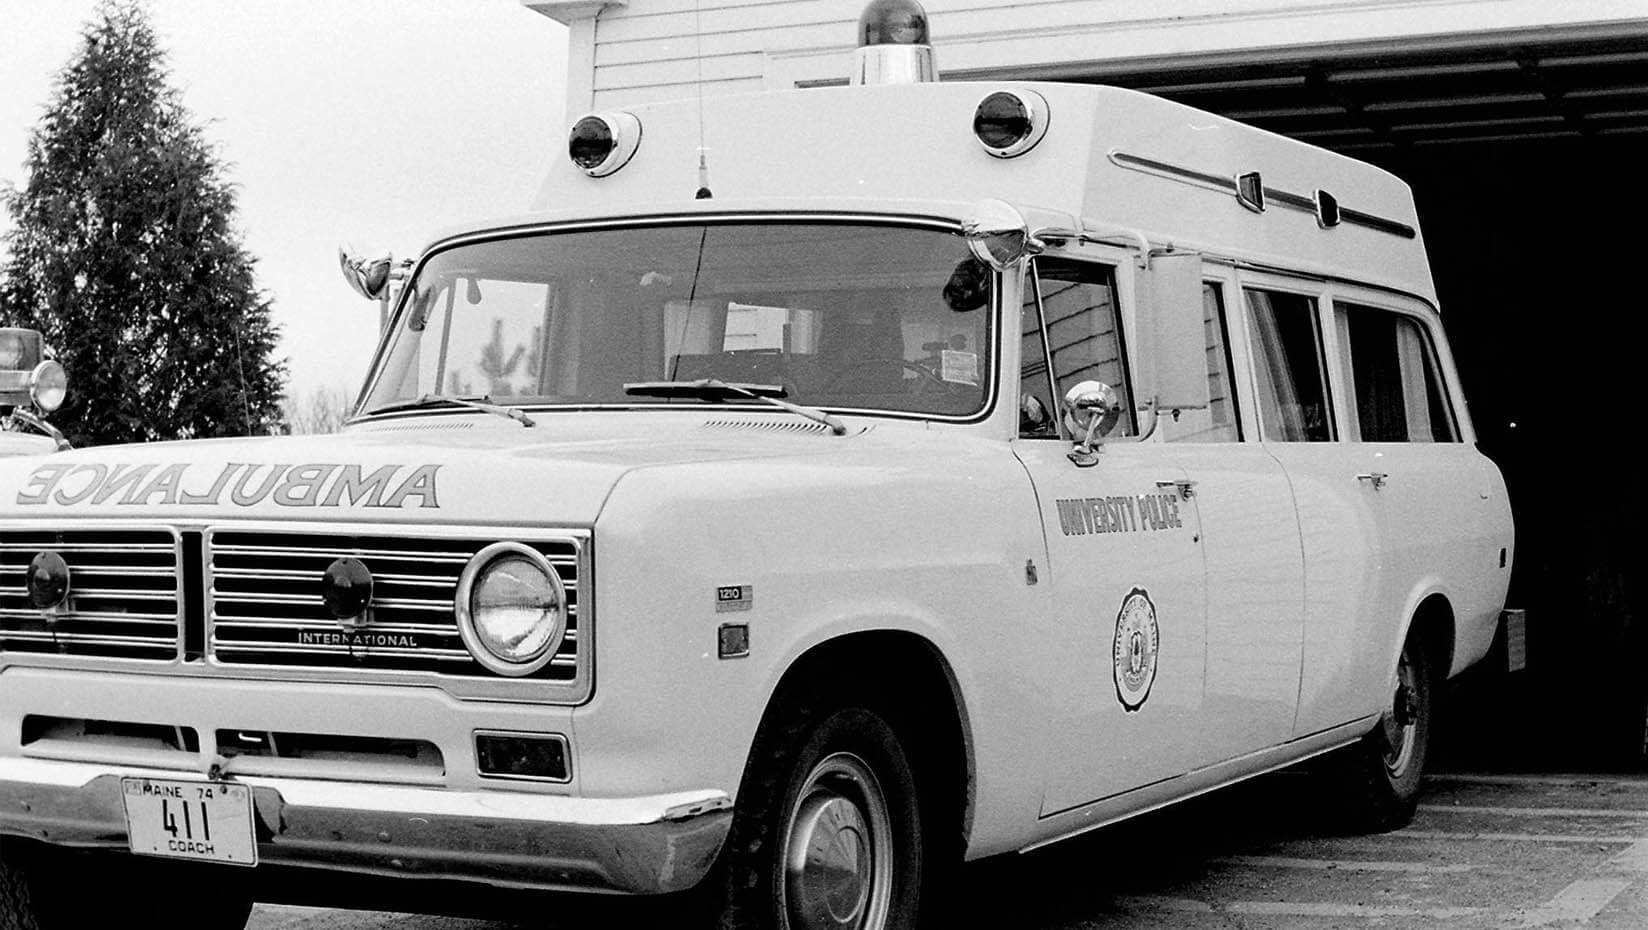 A photo of UVAC's first ambulance from the 1970s